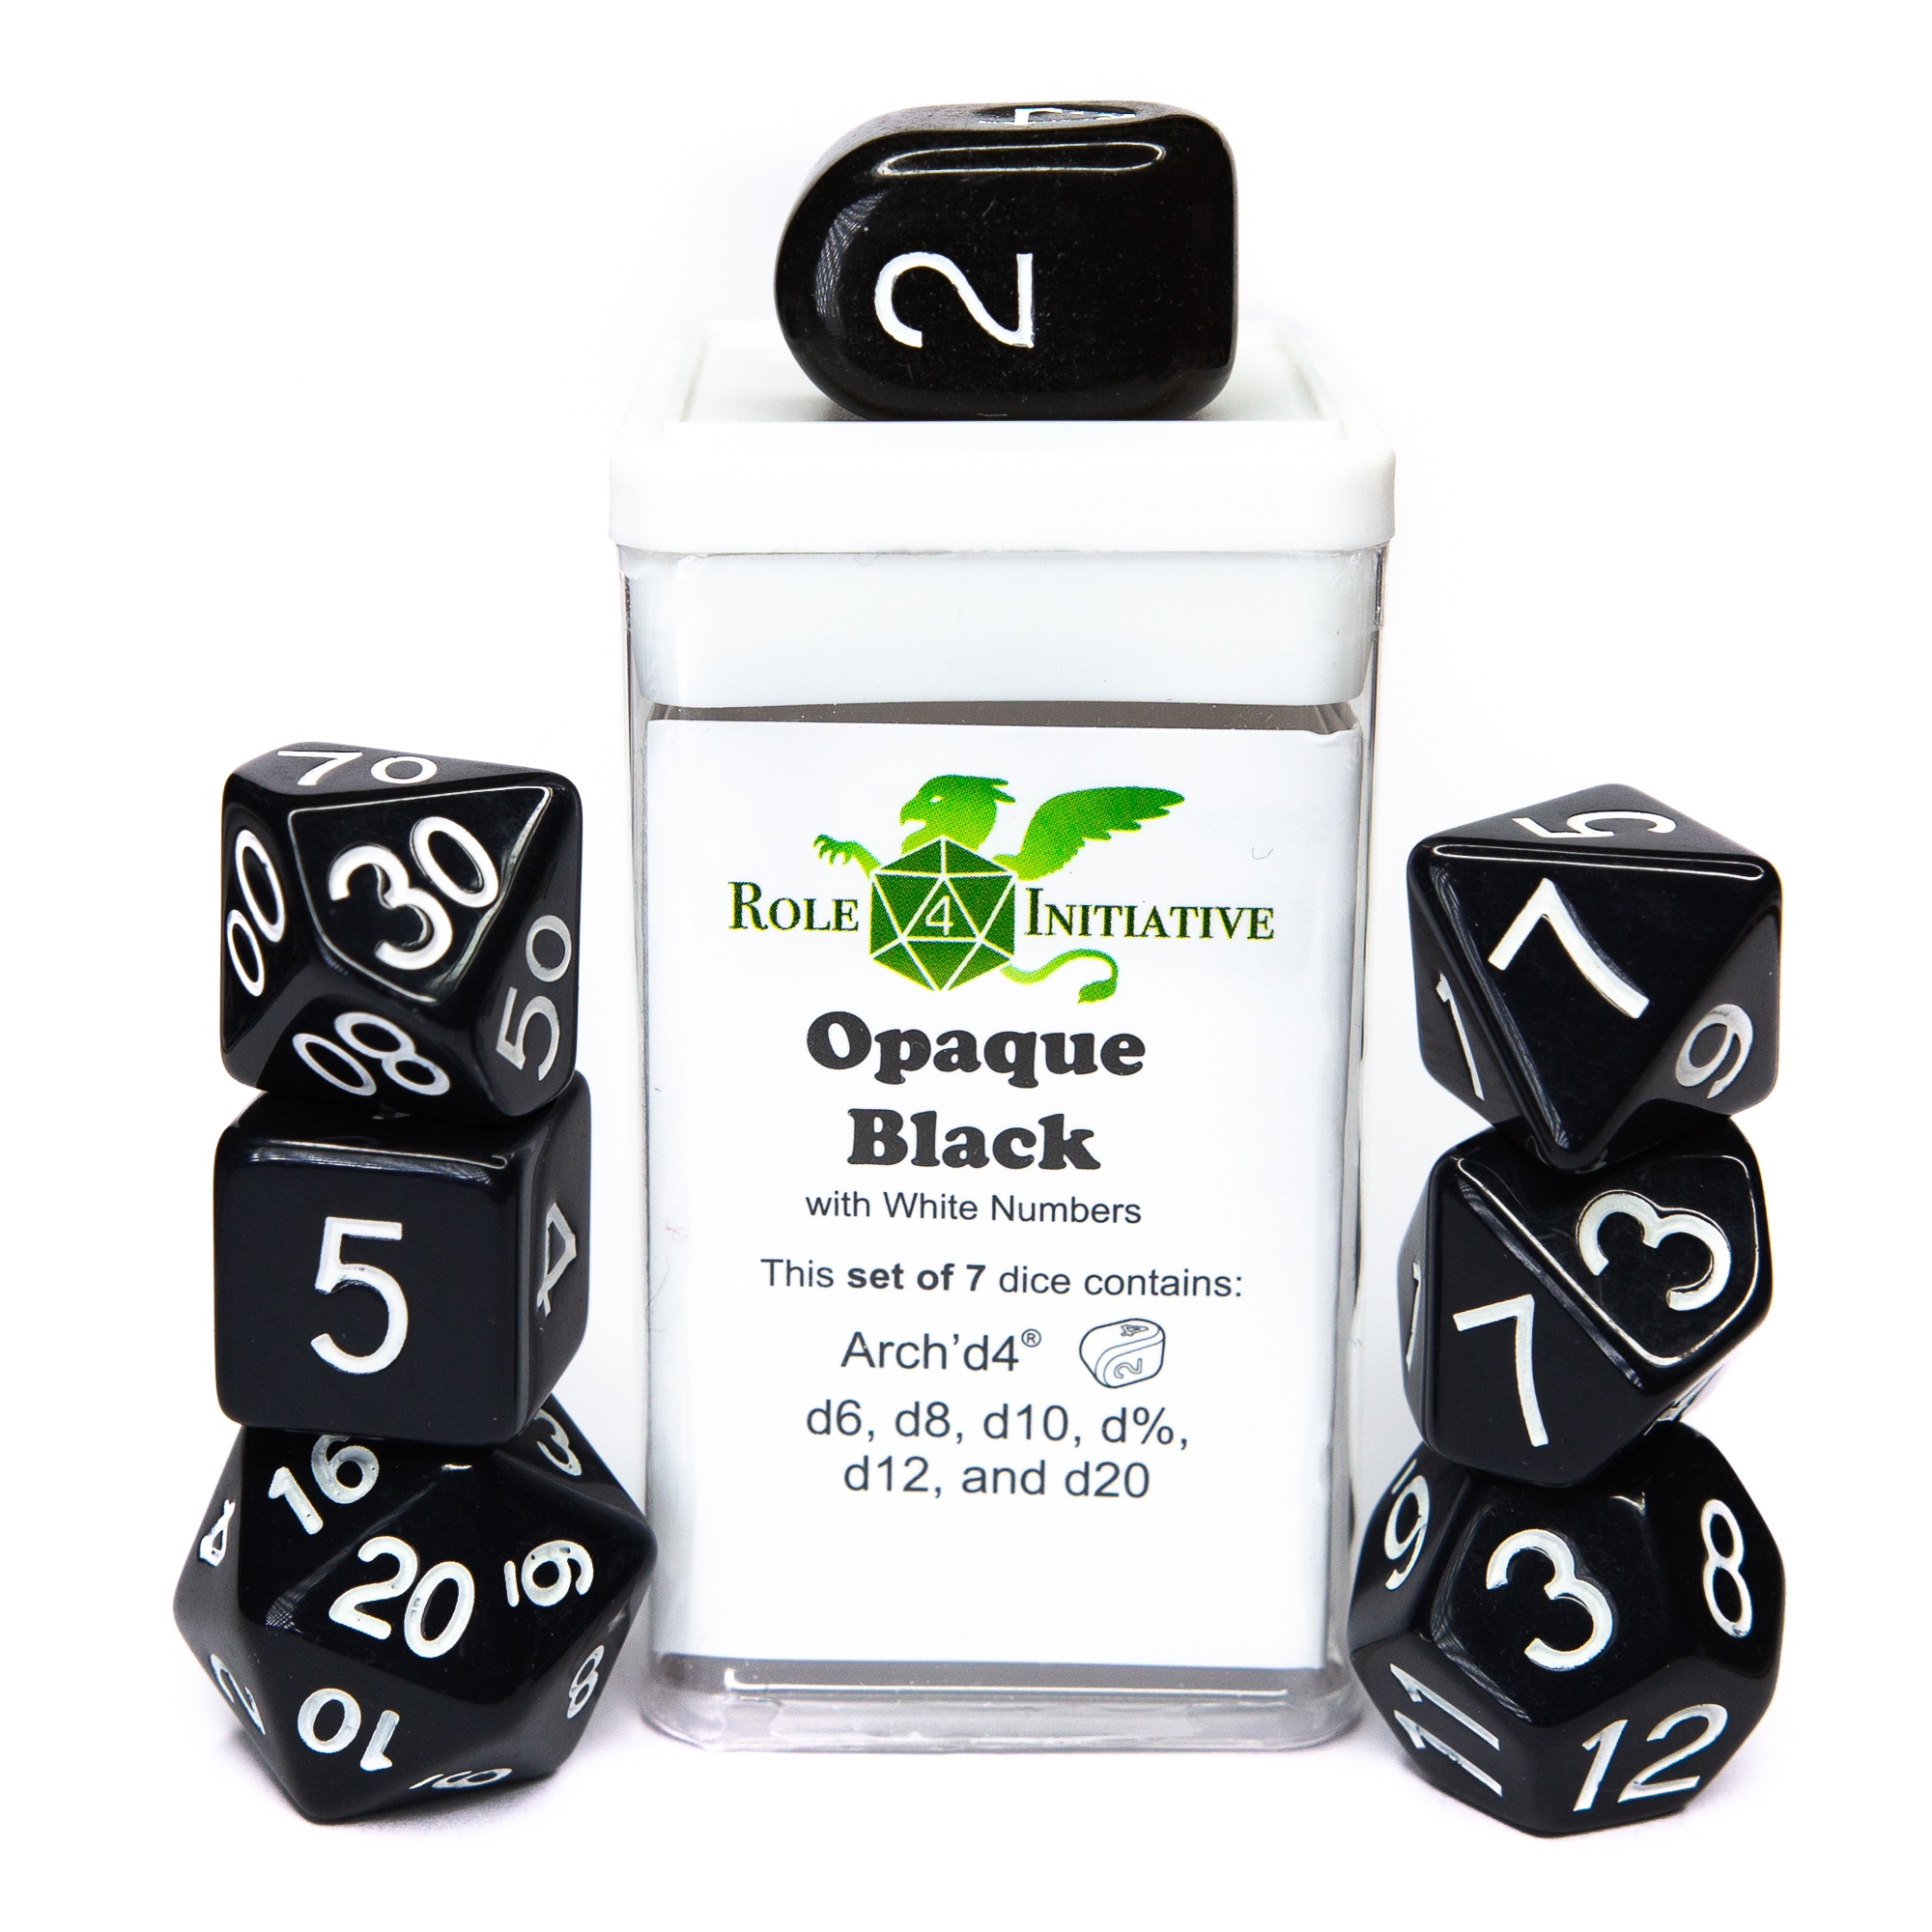 Role 4 Initiative Polyhedral 7 Dice Set: Opaque Black and White [Arch D4]  